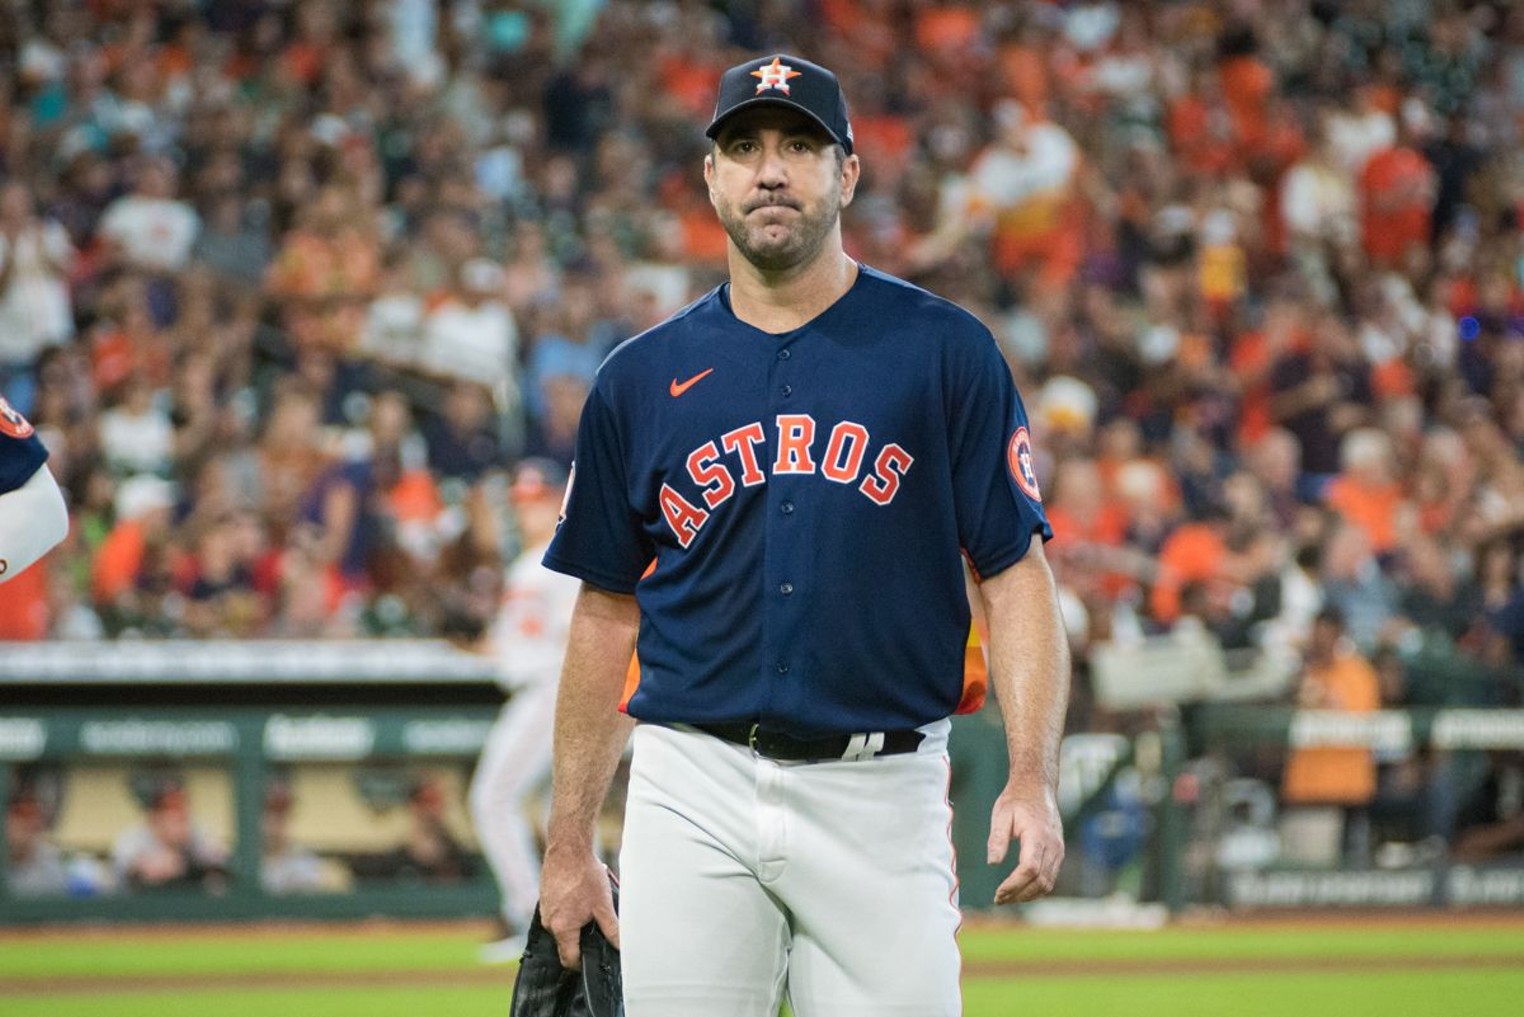 Houston Astros considering to hire Houston-based batting practice pitcher